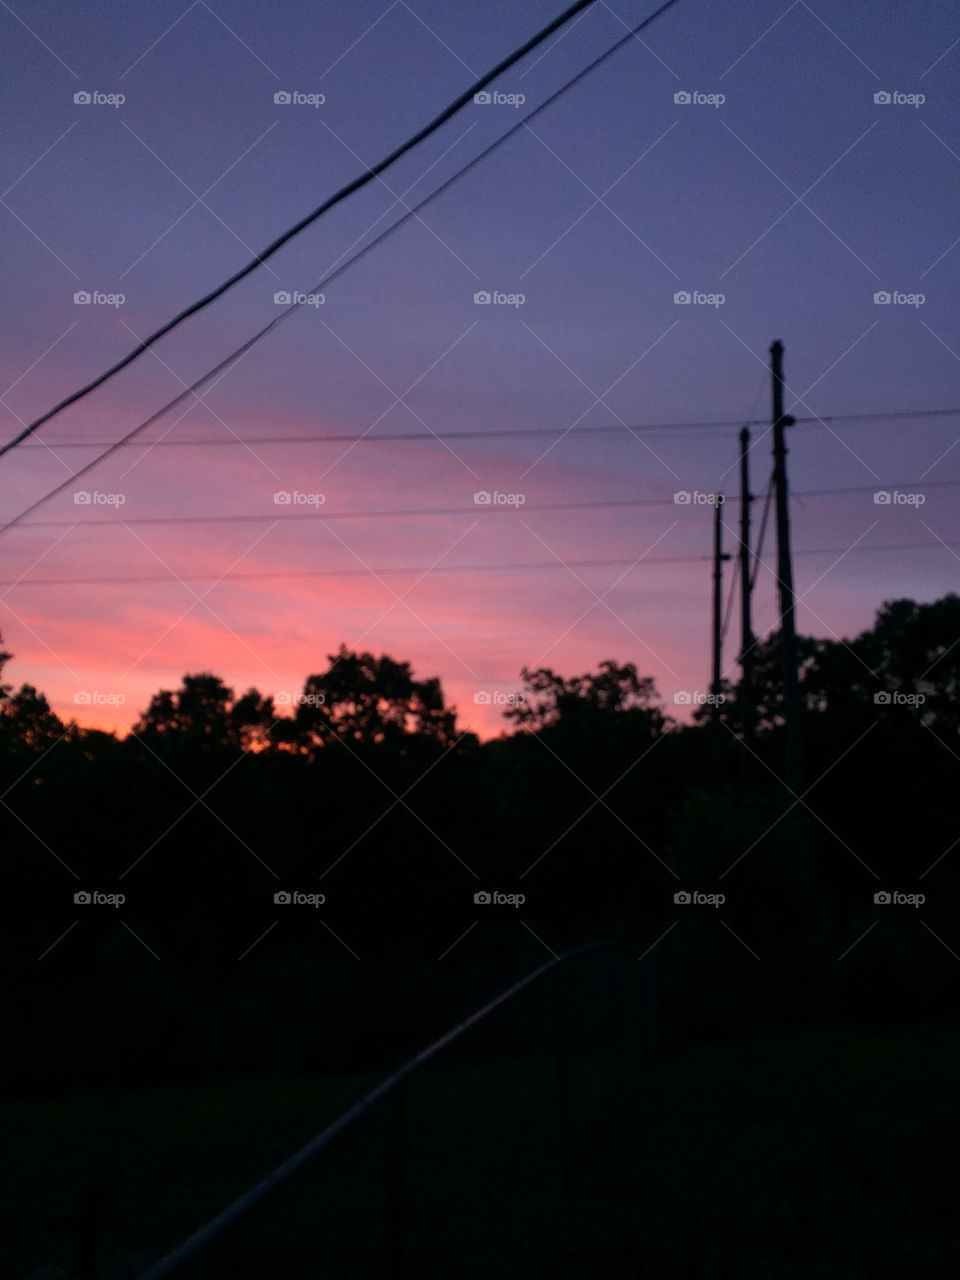 Sunset wires